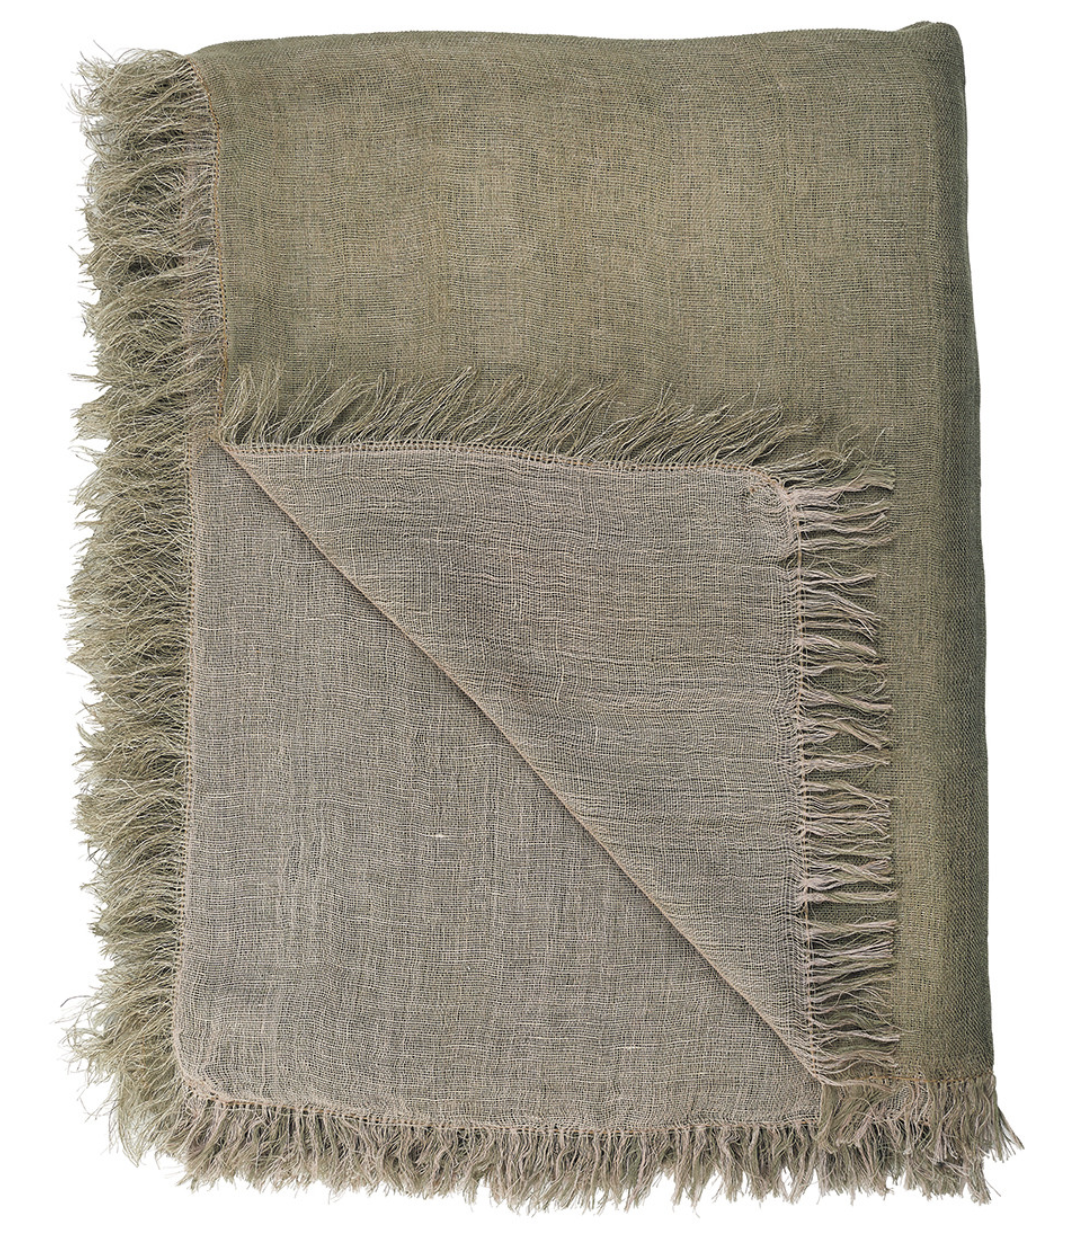 THE BROWNHOUSE INTERIORS Lea sage creased-linen throw